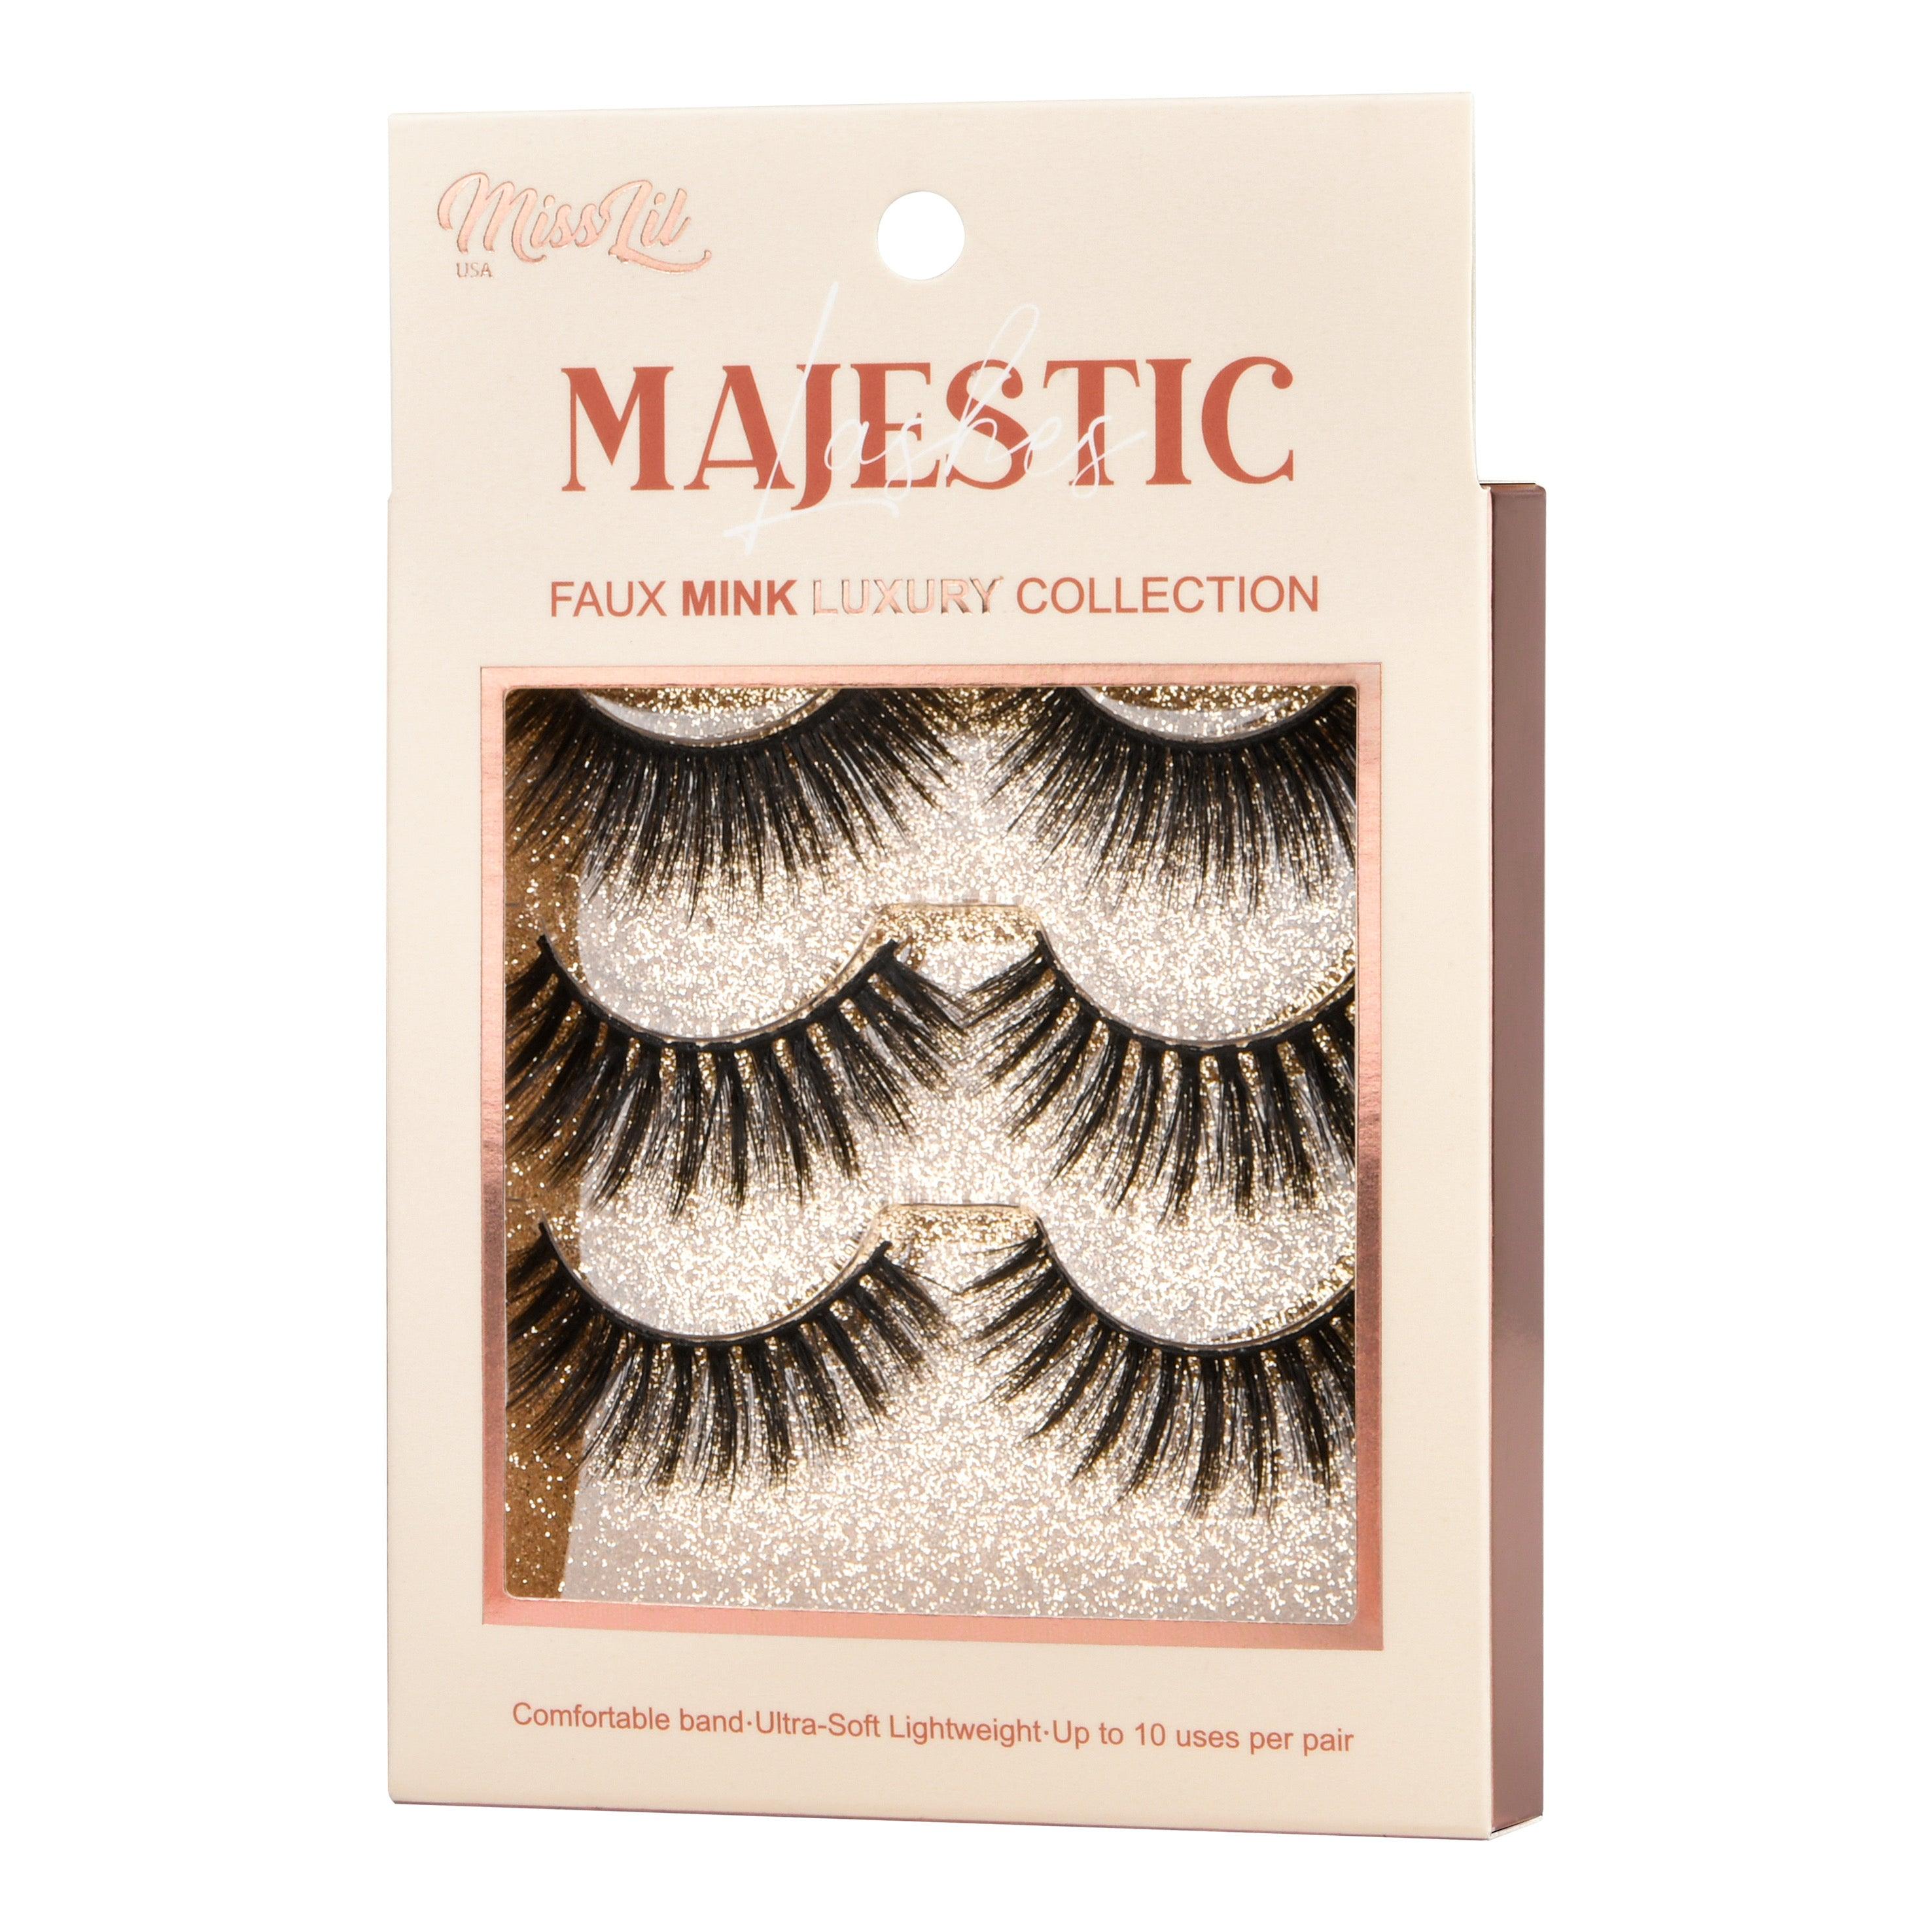 3 Pairs Lashes Majestic Collection #1 - Miss Lil USA